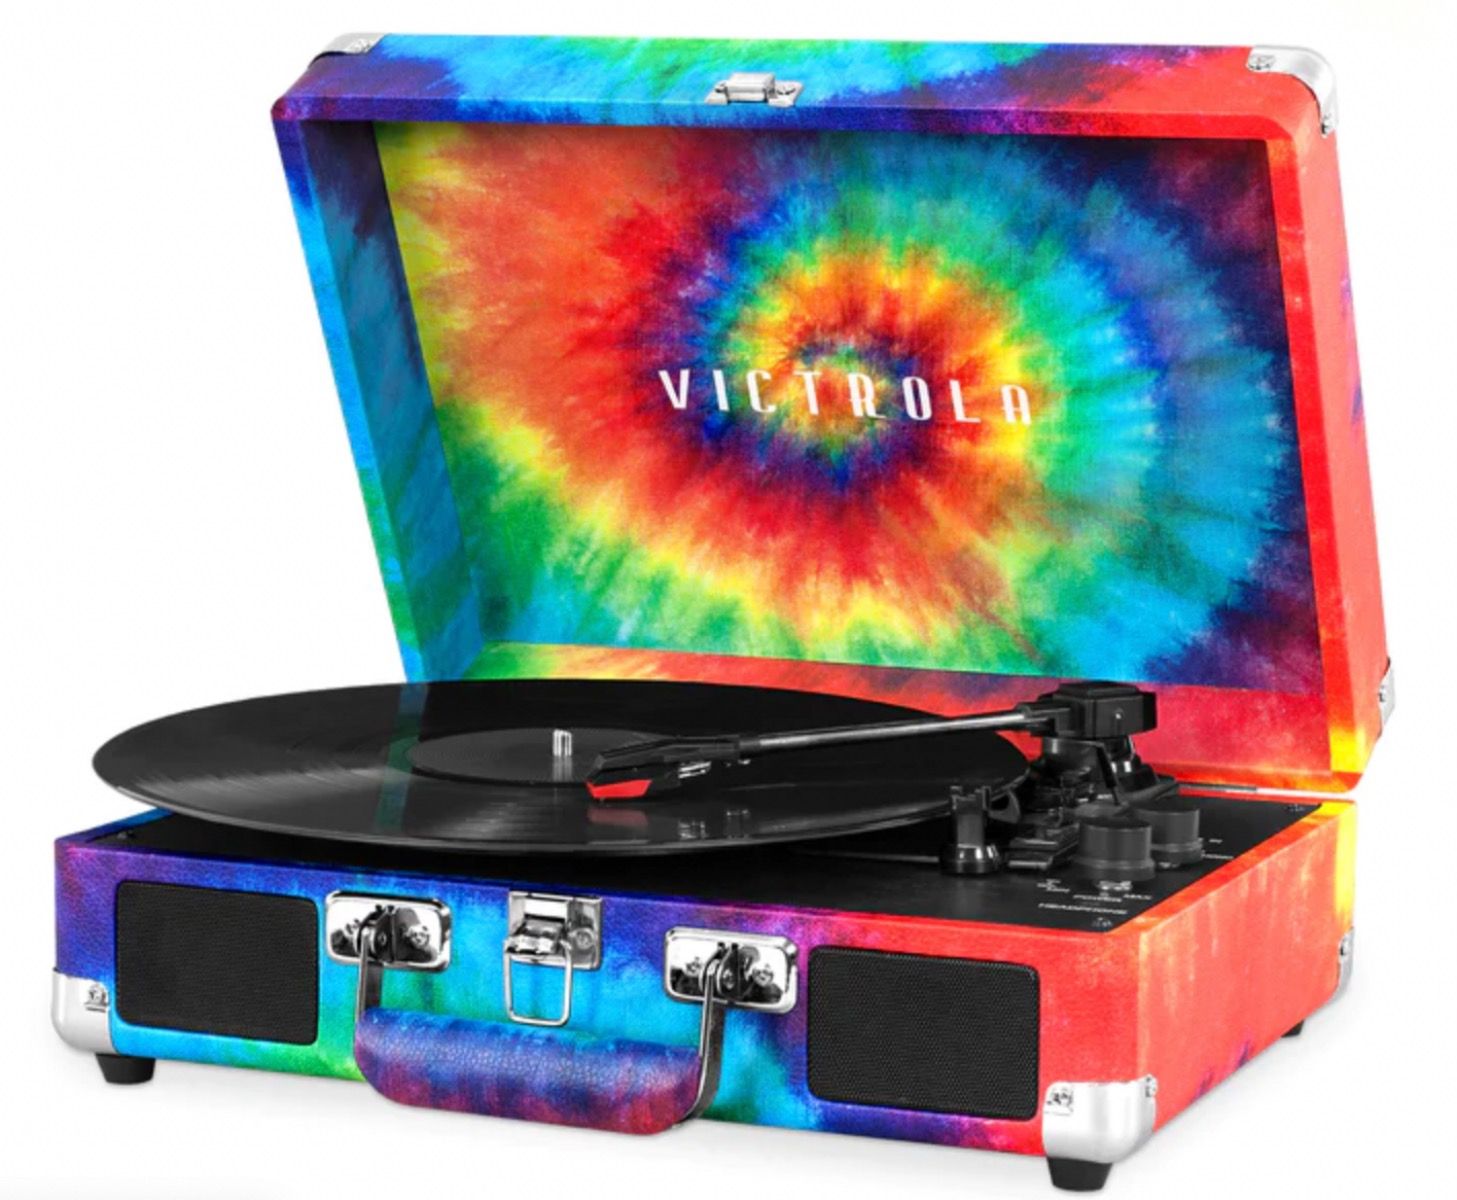 Psychedelic Victrola-Suitcase record player with lid up playing record